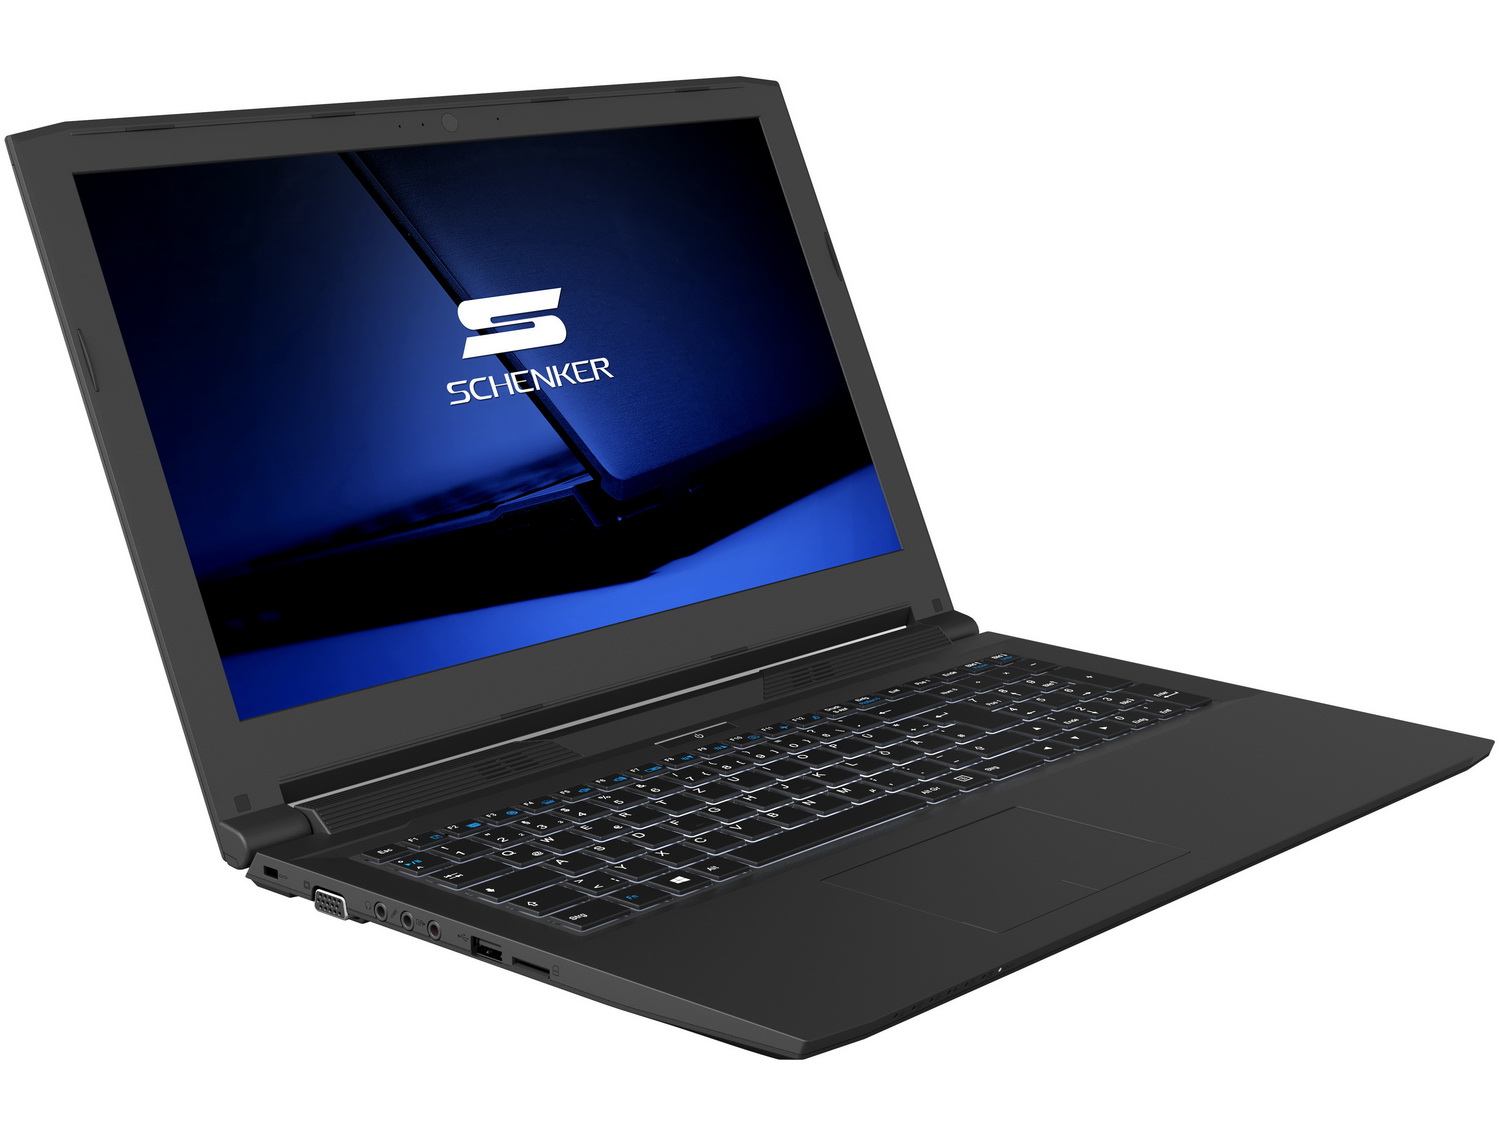 Schenker launches Clevo-based Flex F516 and F526 notebooks ...